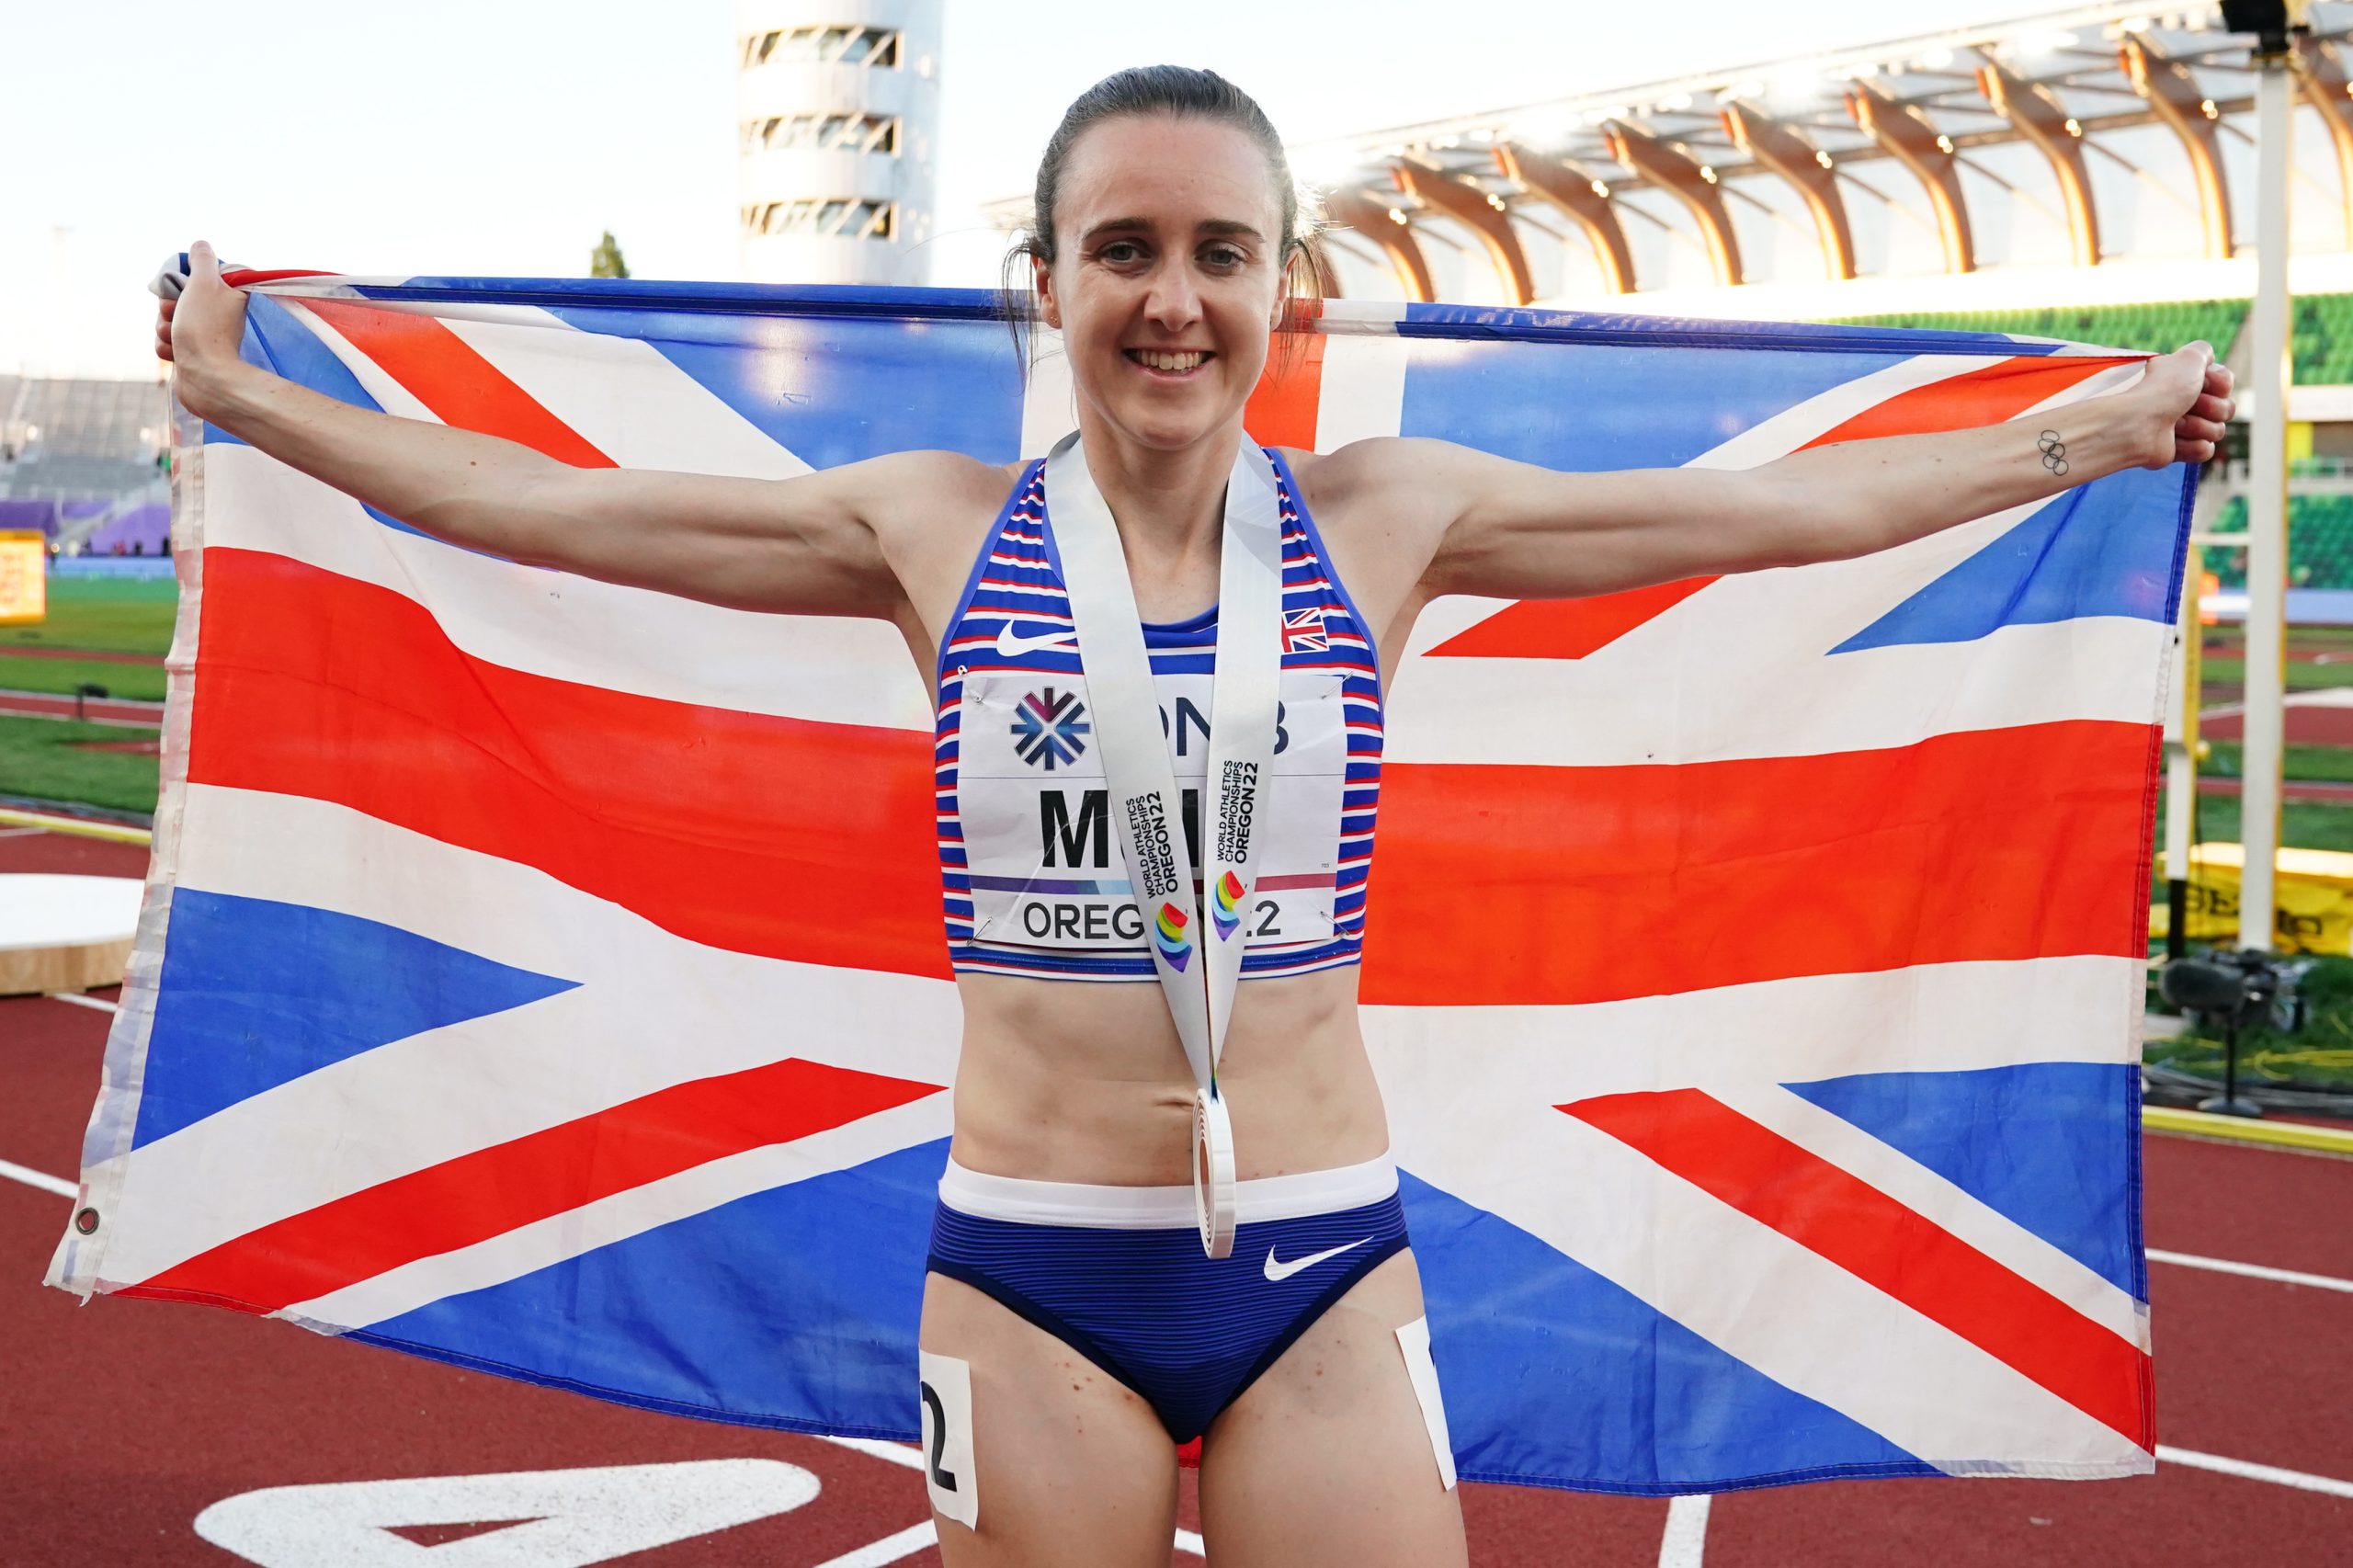 Laura Muir’s brave effort clinches 1500m bronze medal at World Championships